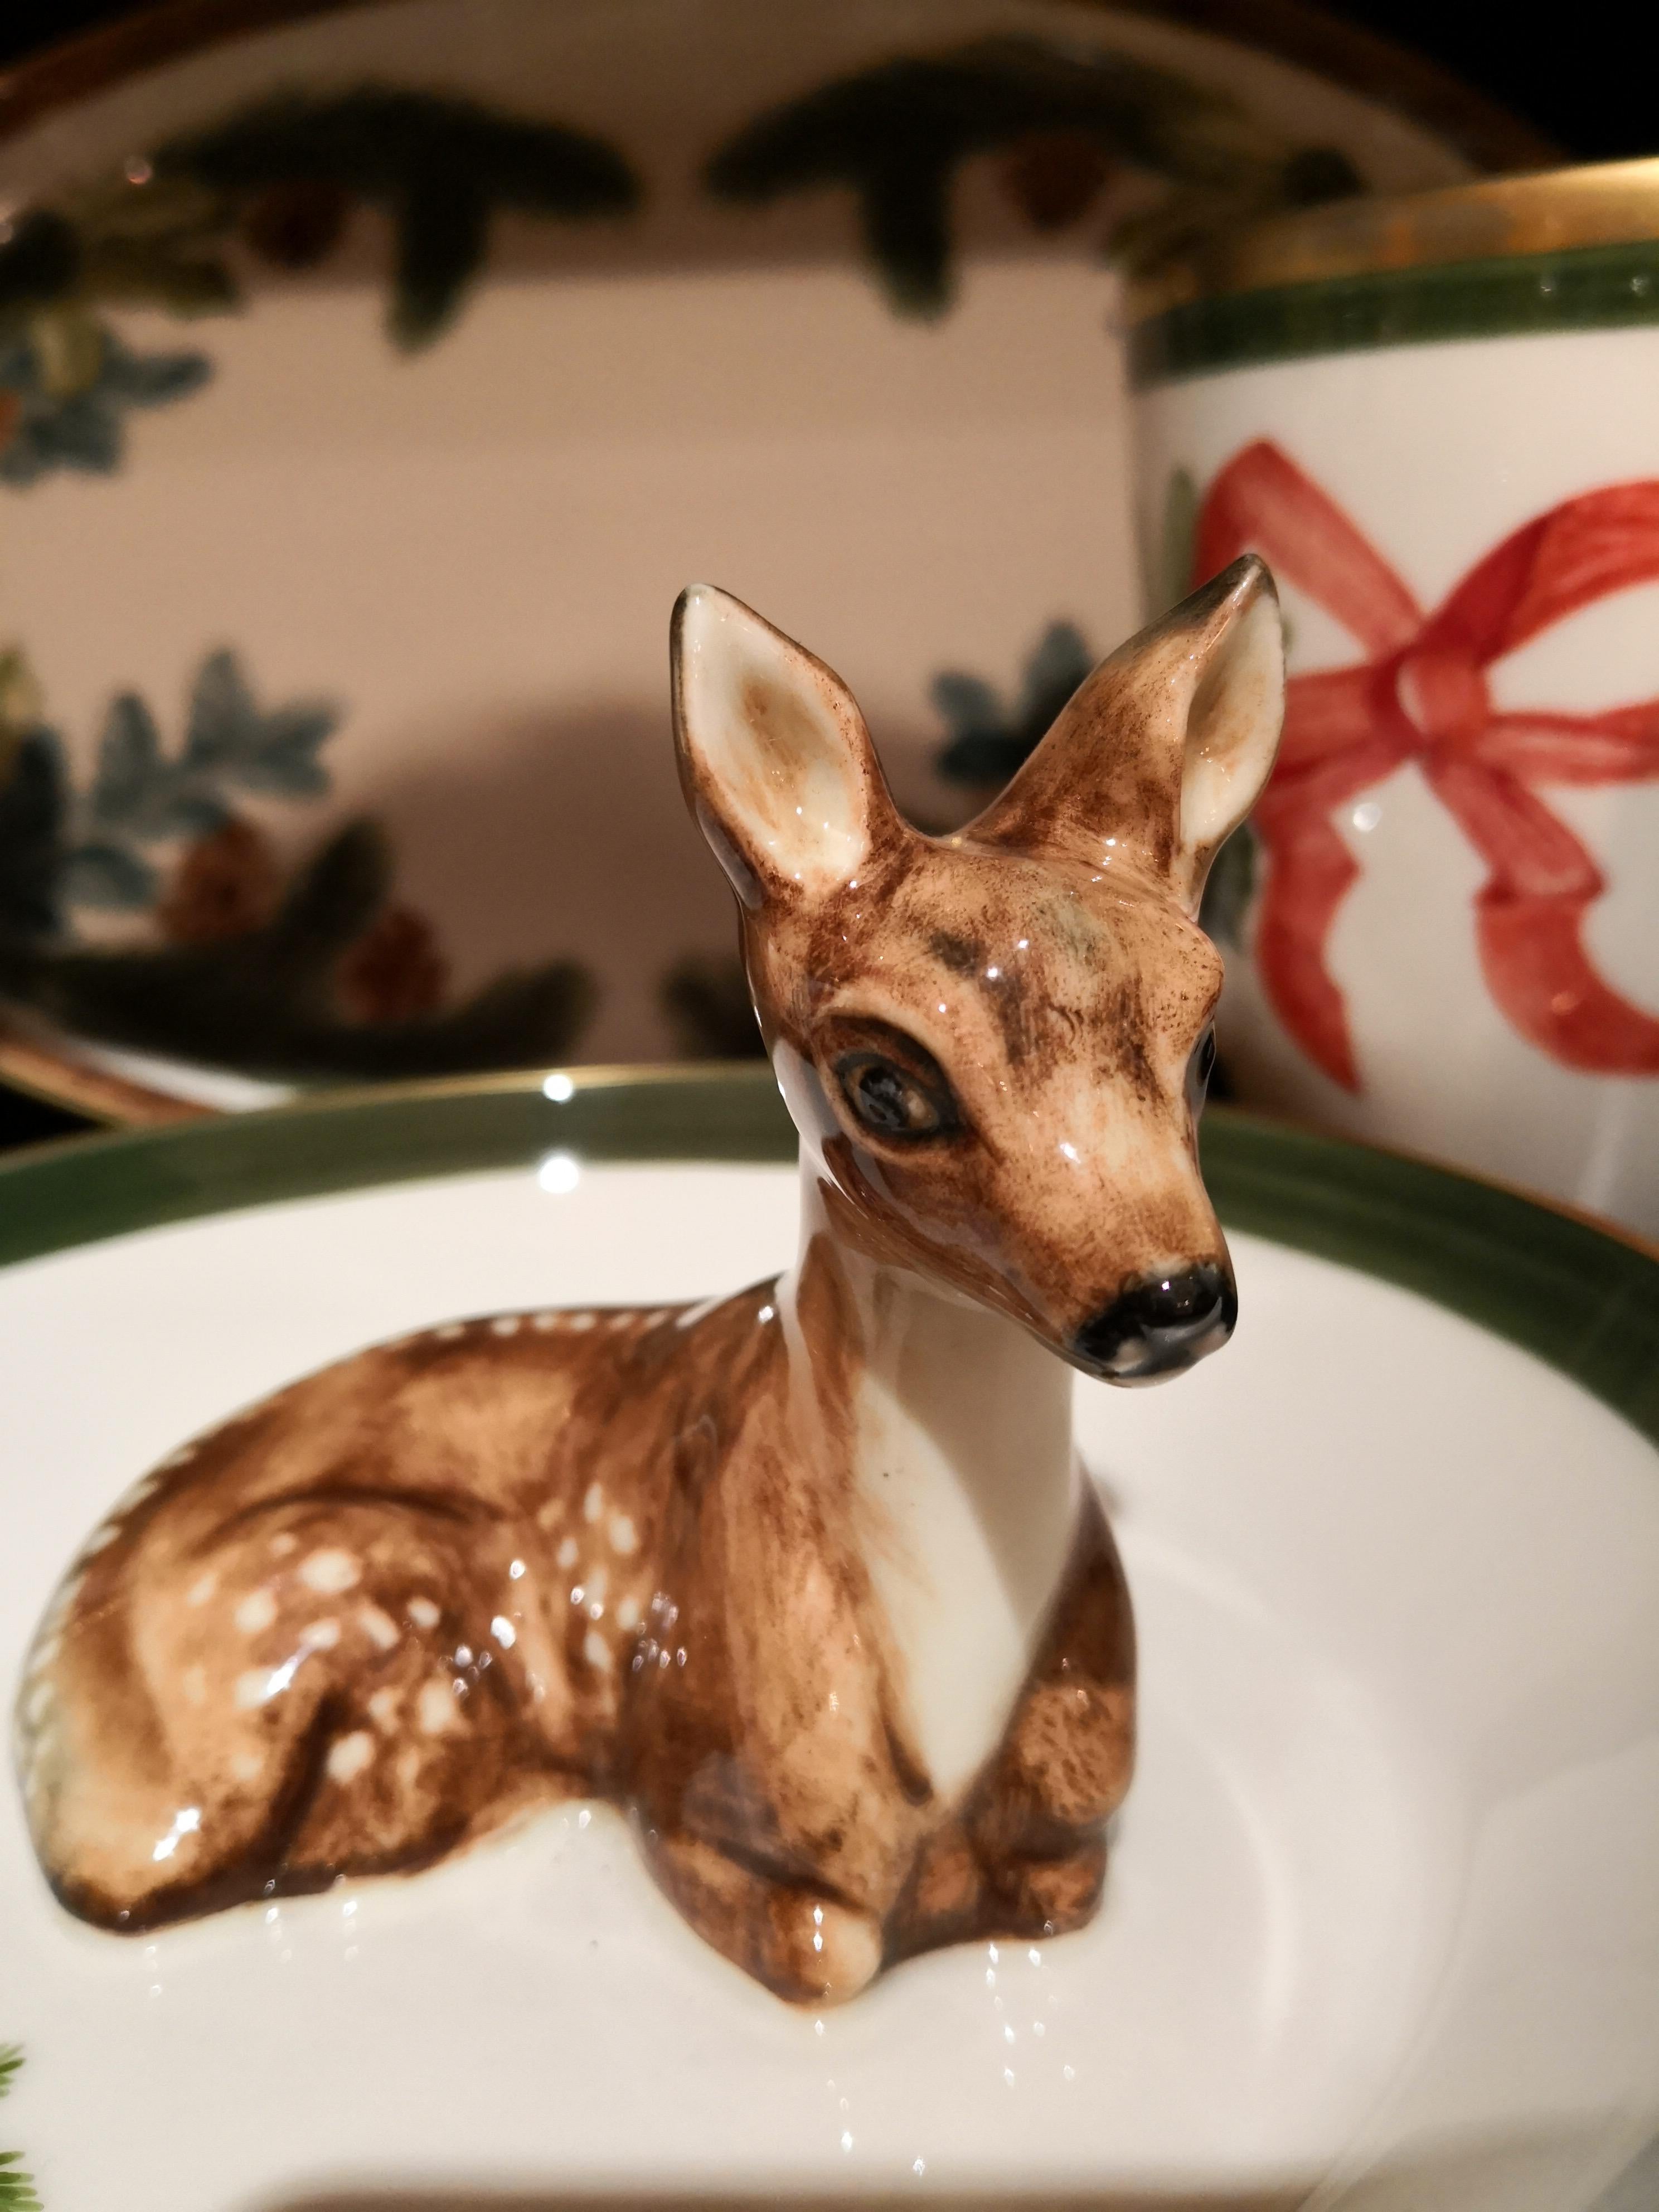 Completely handmade porcelain bowl with a hands-free natrualistic painted bambi figure in brown. The bambi is sitting in the middle of the bowl for decorating nuts or sweets around. Rimmed with a fine 24-carat gold line. Handmade in